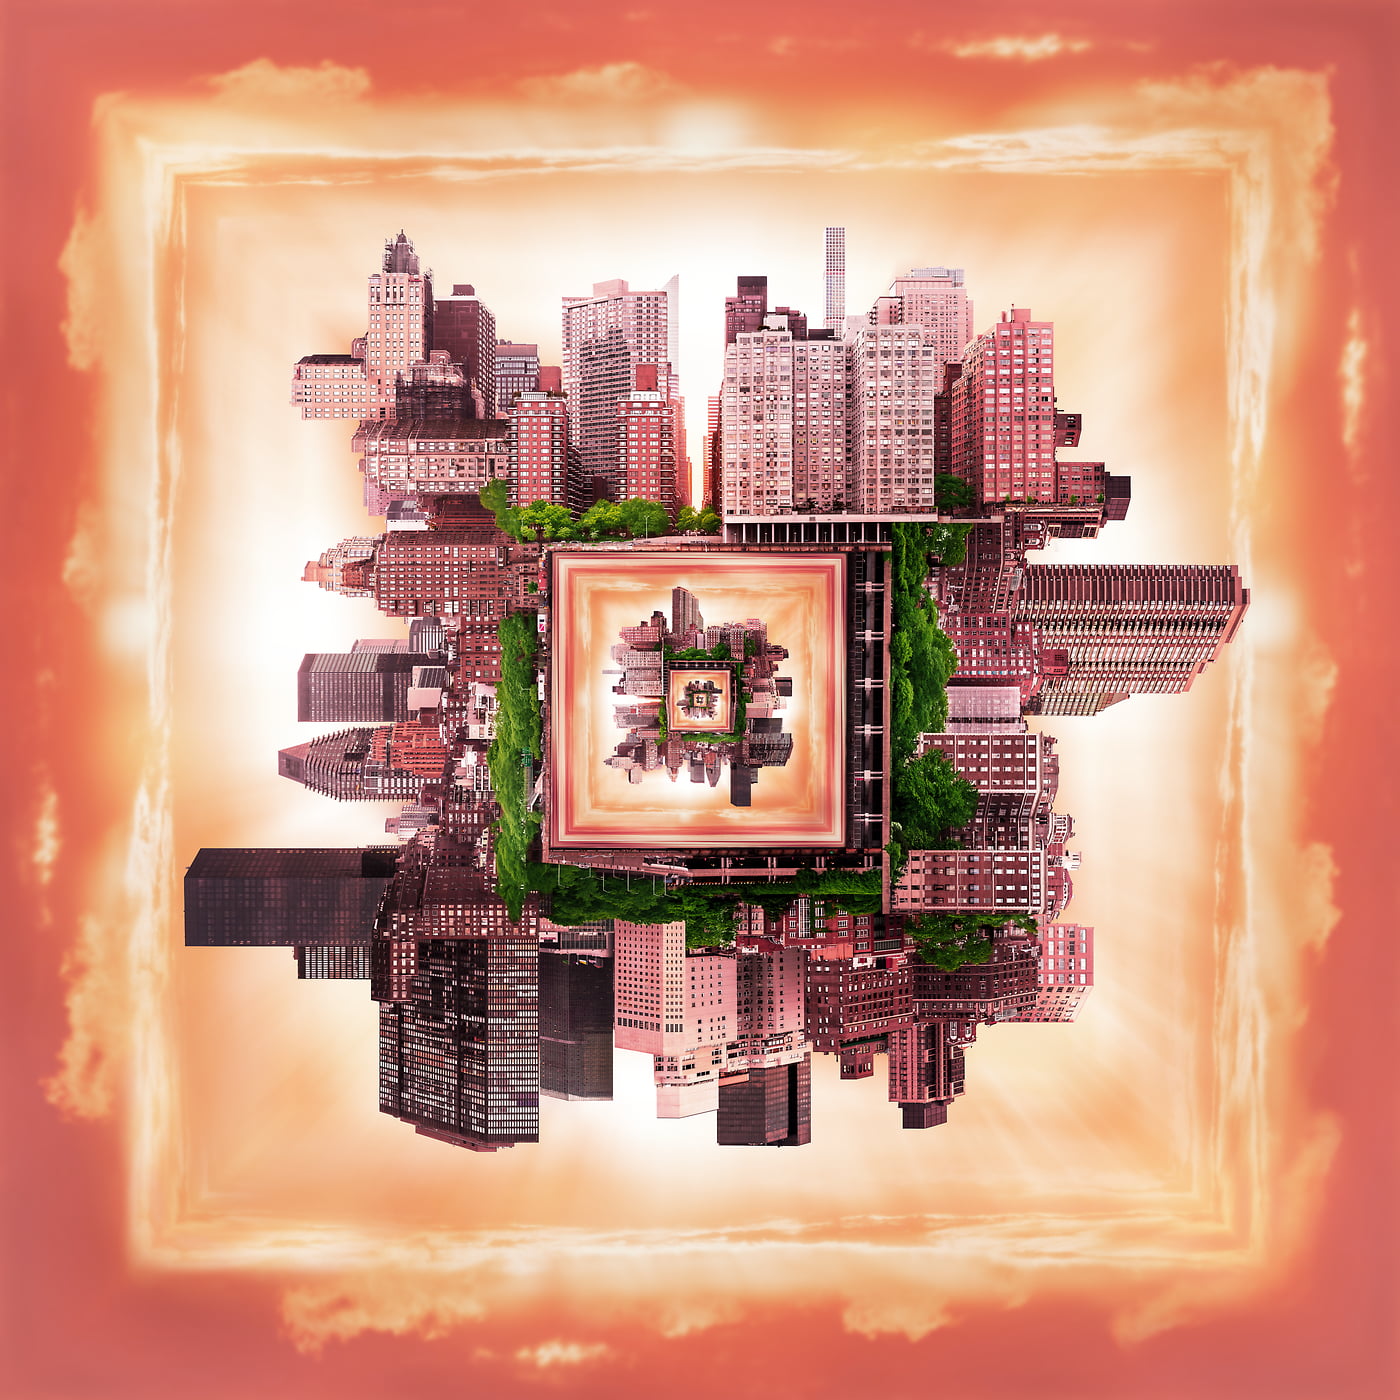 2,204 megapixels! A very high resolution, large-format abstract photo of a city in a square shape; fine art print created by Dan Piech in Midtown East, Manhattan, New York City.